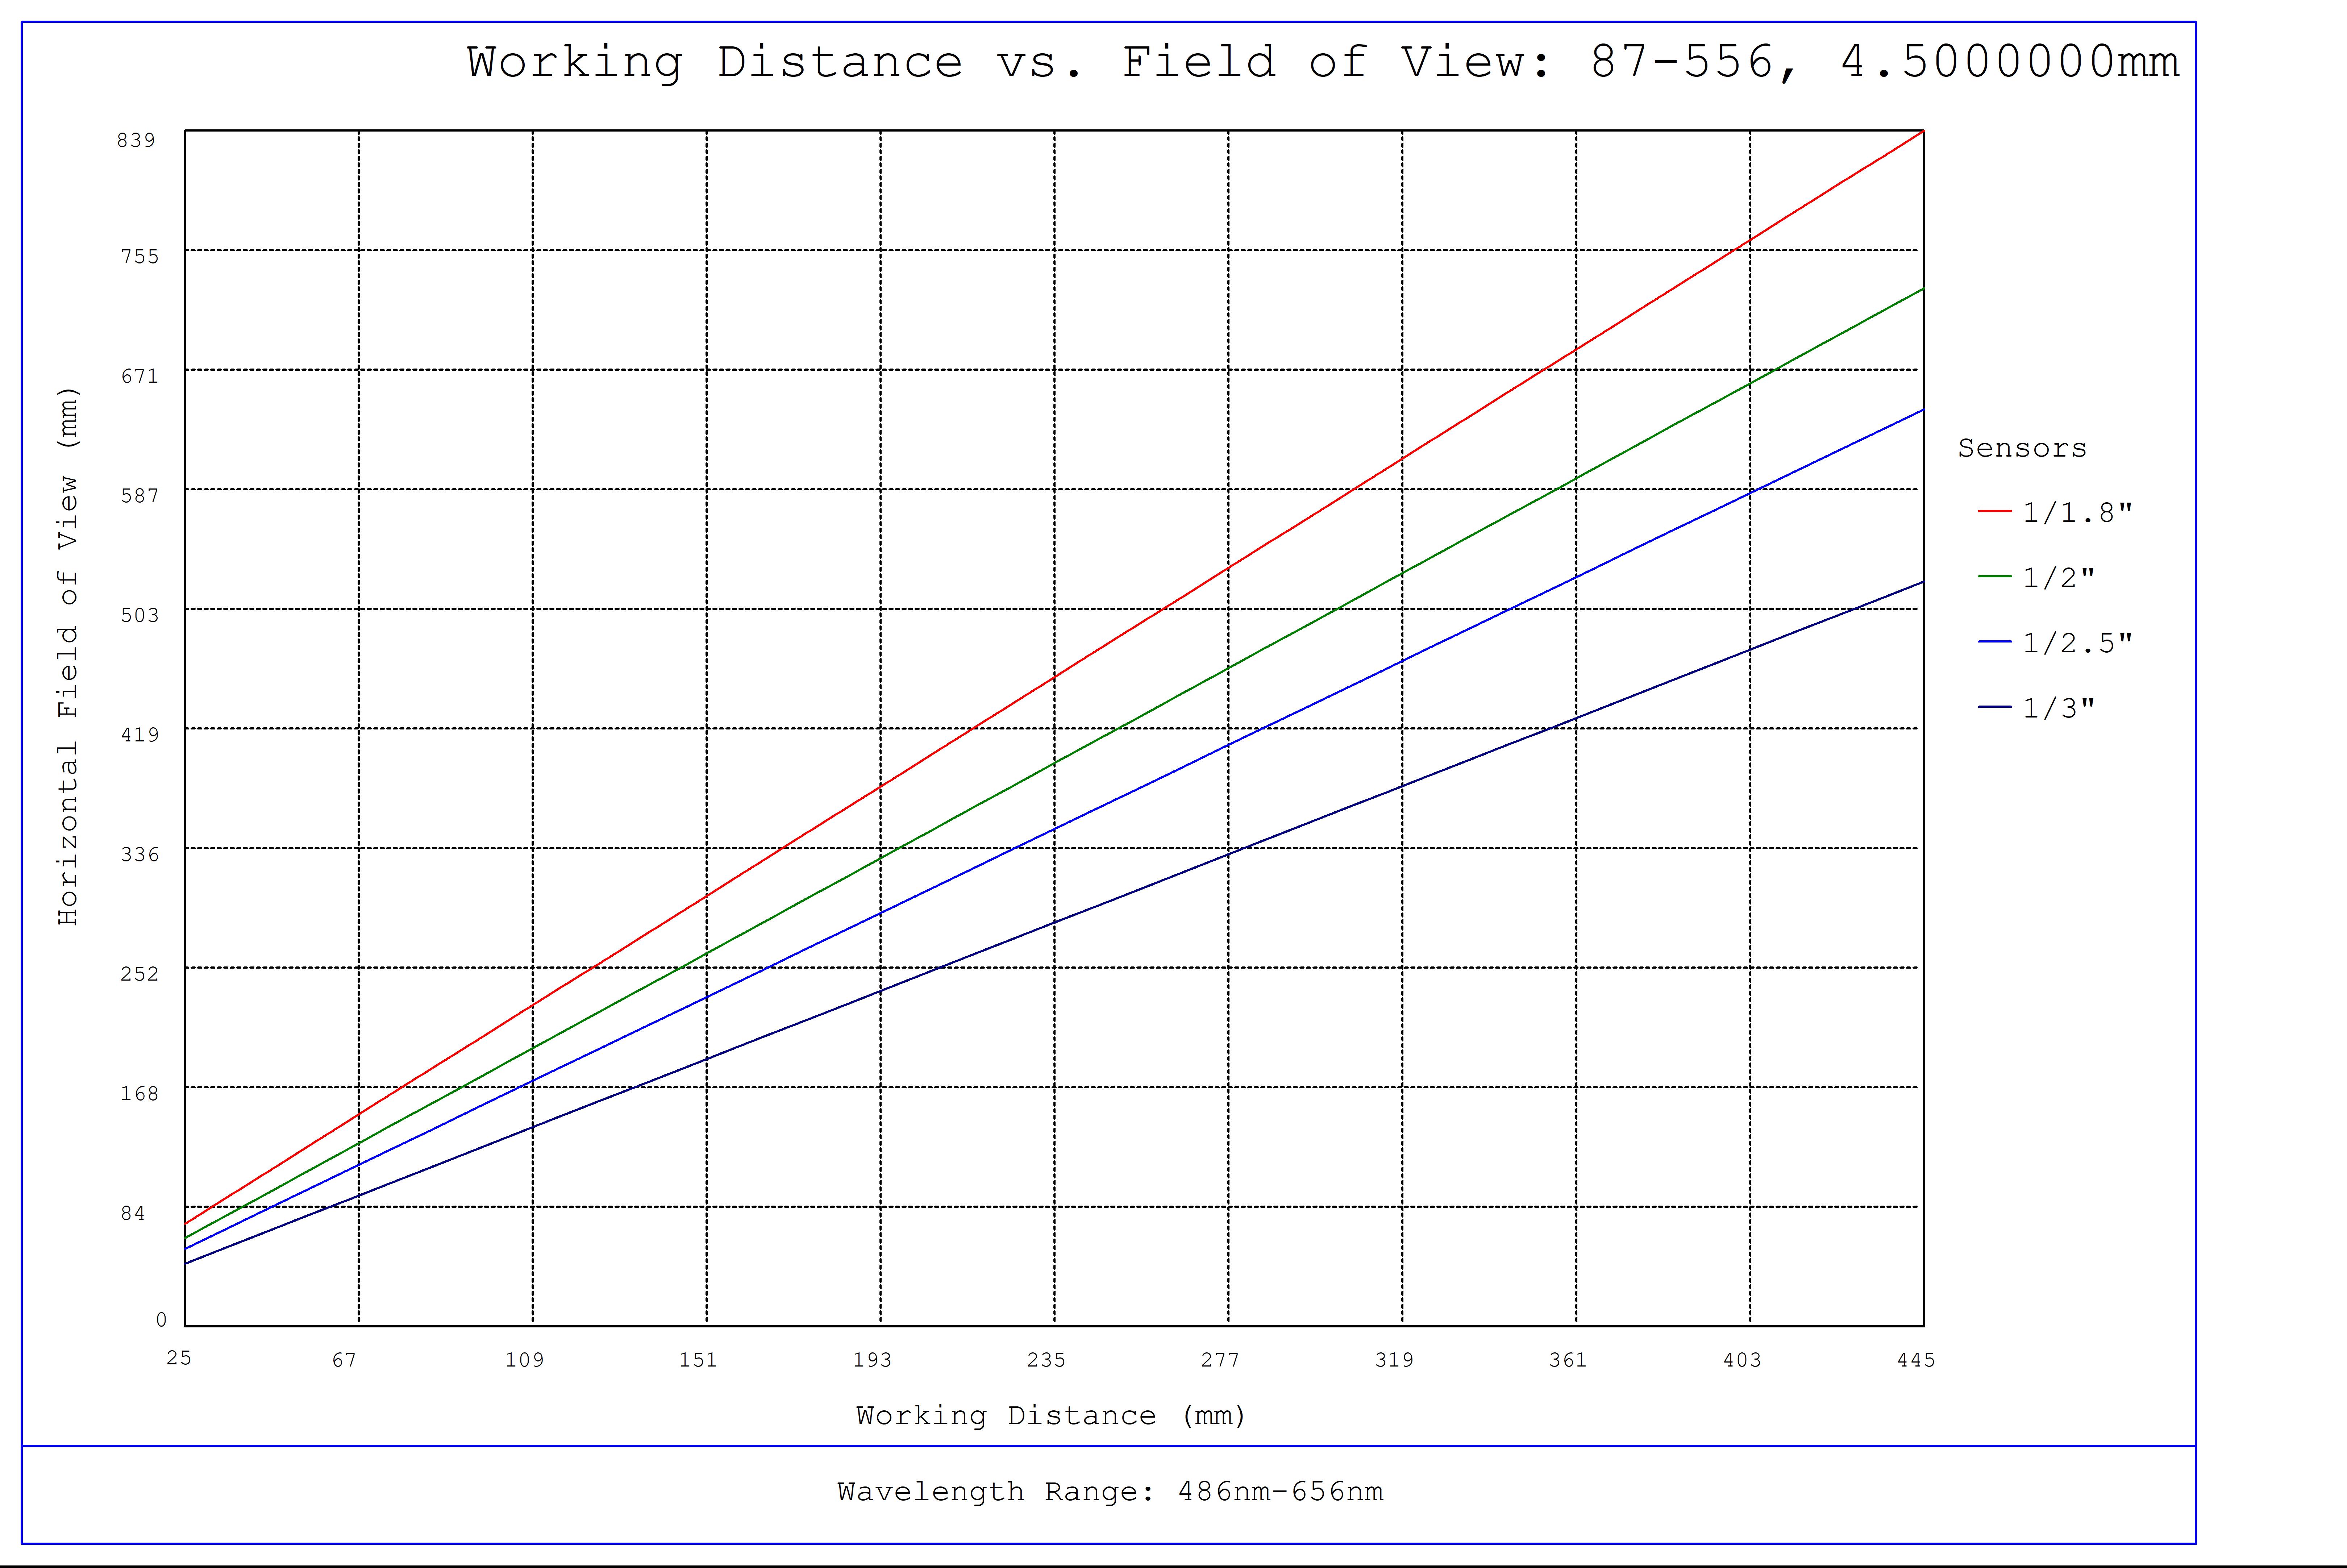 #87-556, 4.5mm, f/11 Ci Series Fixed Focal Length Lens, Working Distance versus Field of View Plot